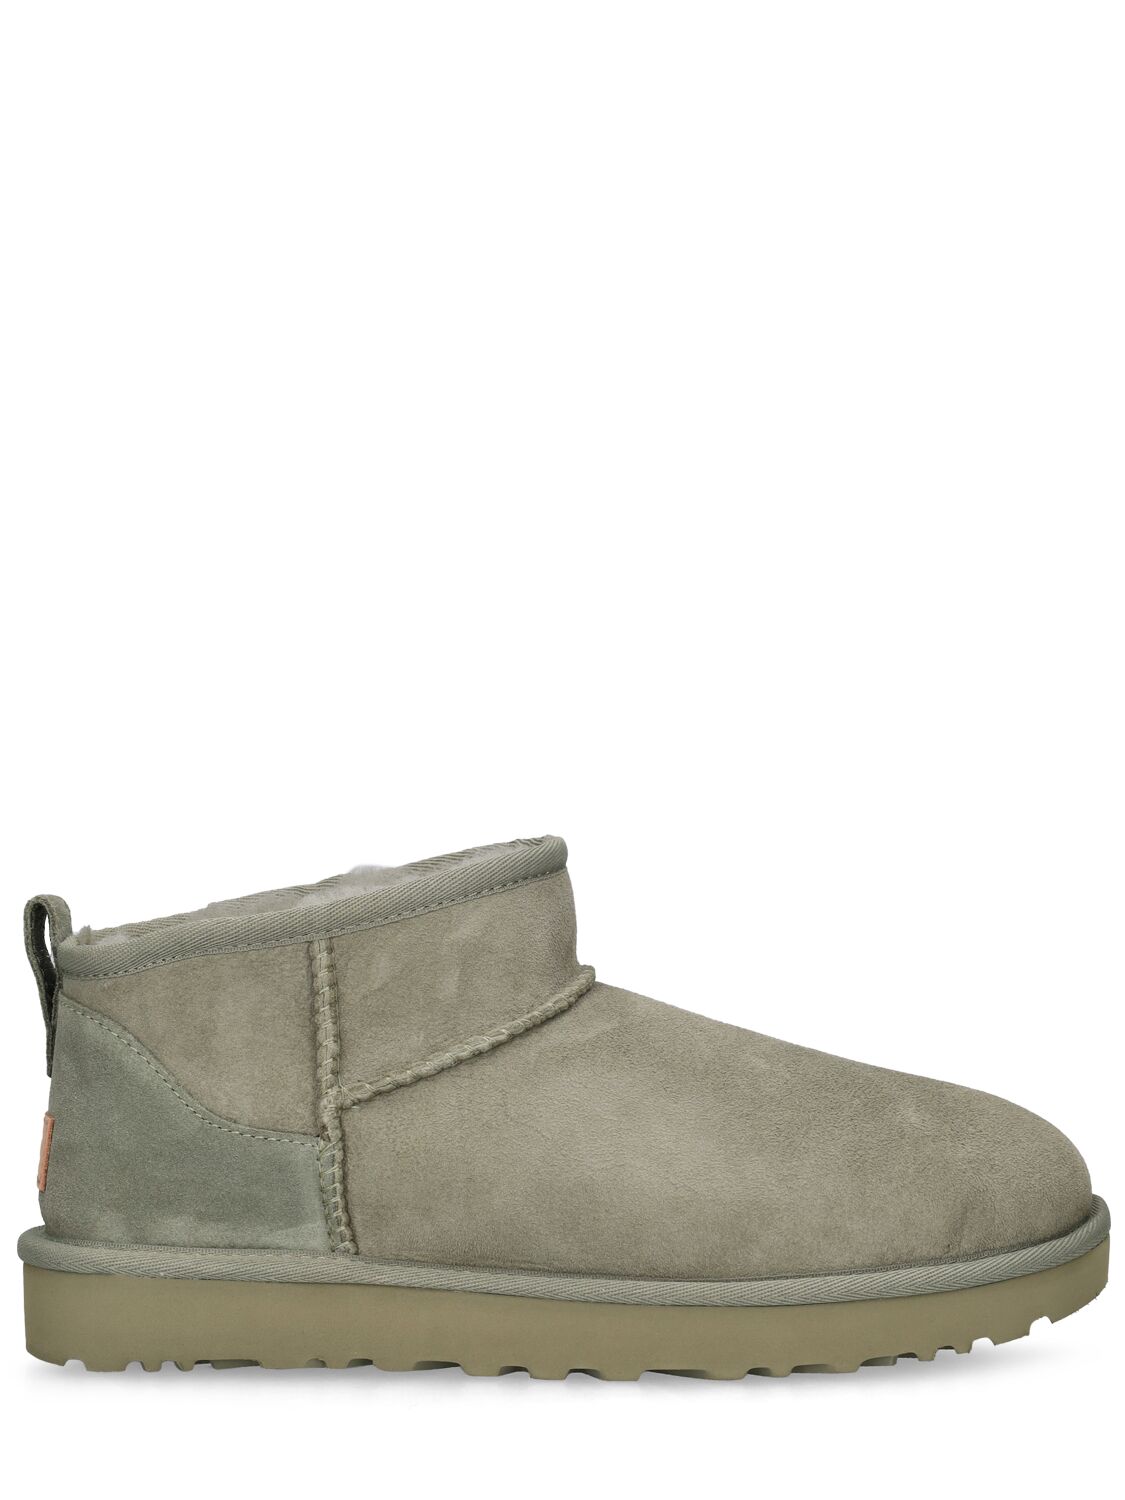 Ugg 10mm Classic Ultra Mini Shearling Boots In Olive Green